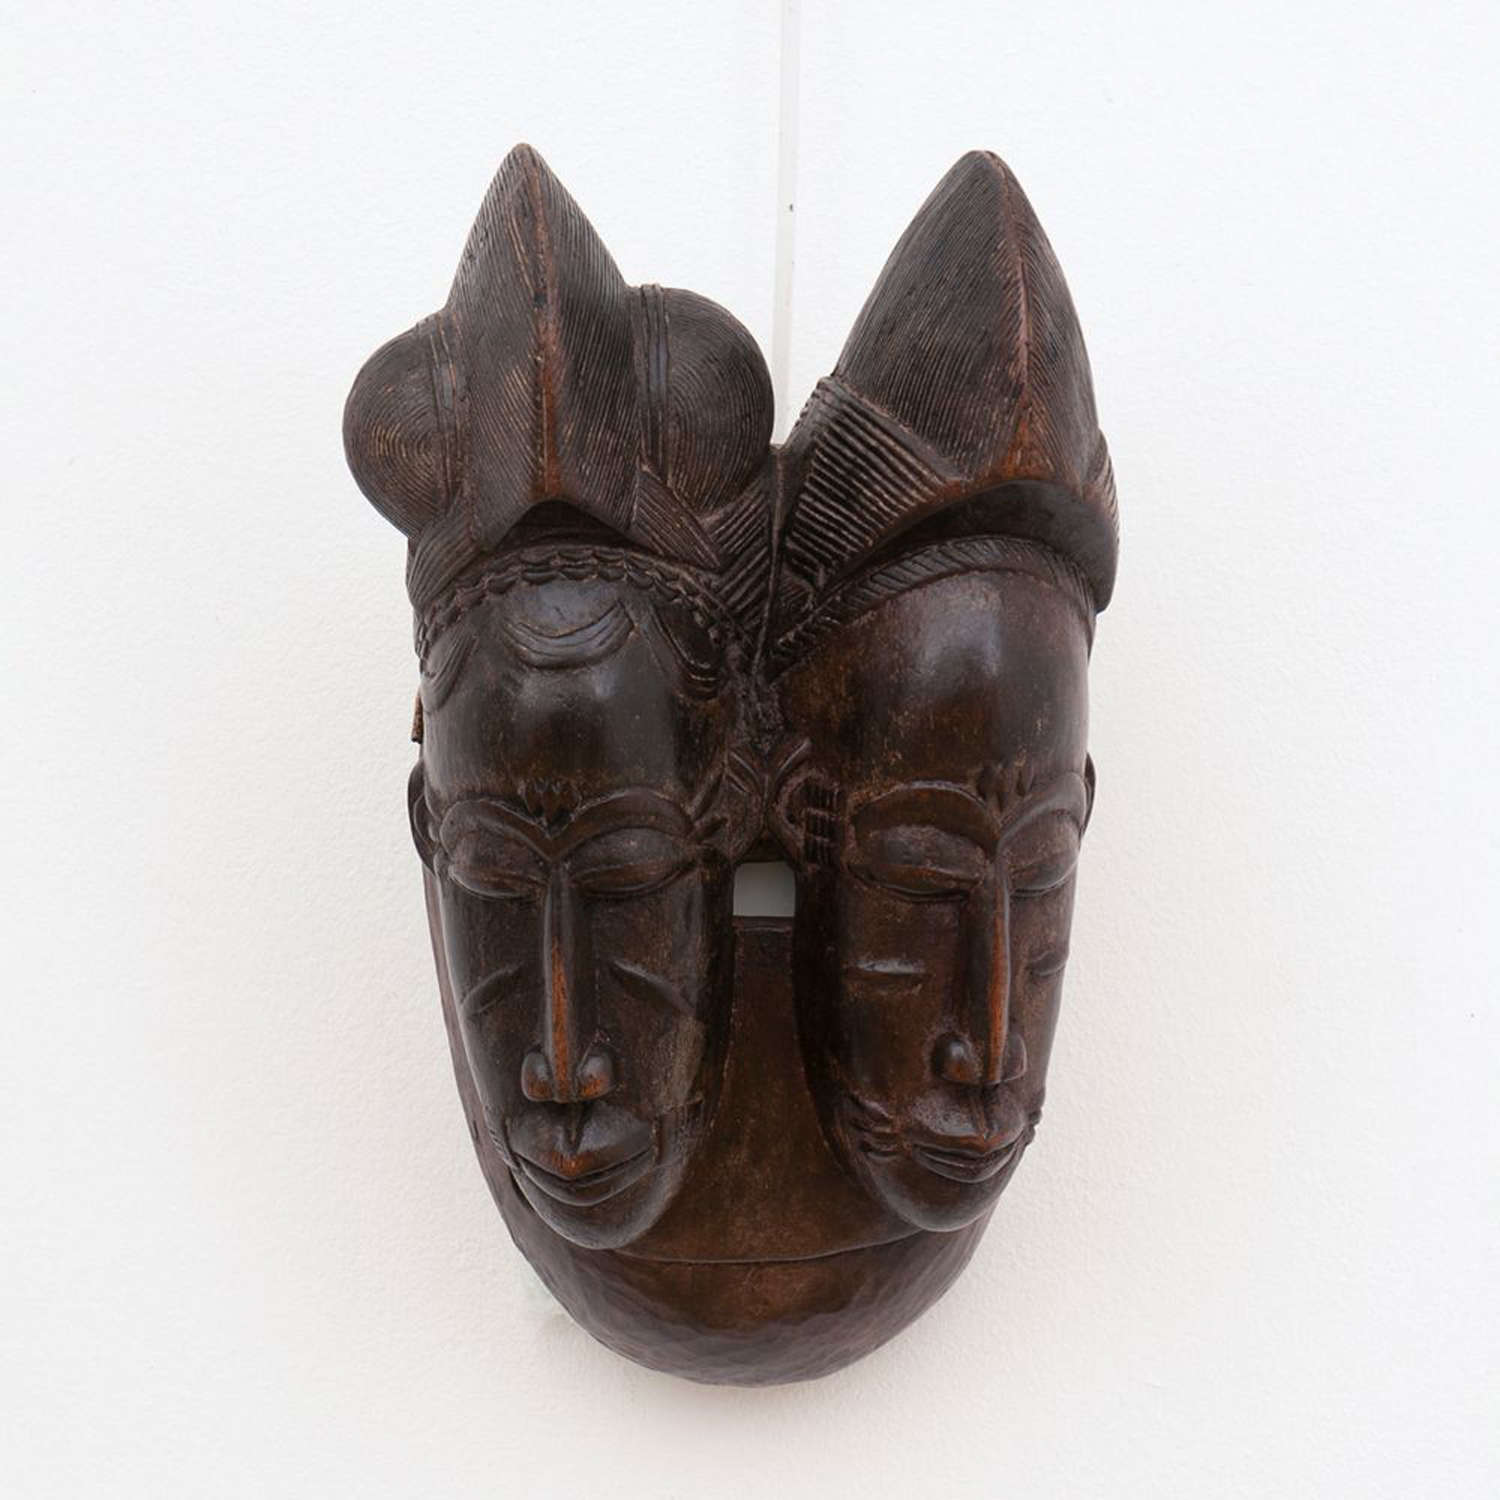 Late 19th Century Antique Tribal Double Headed Mask from Ivory Coast c